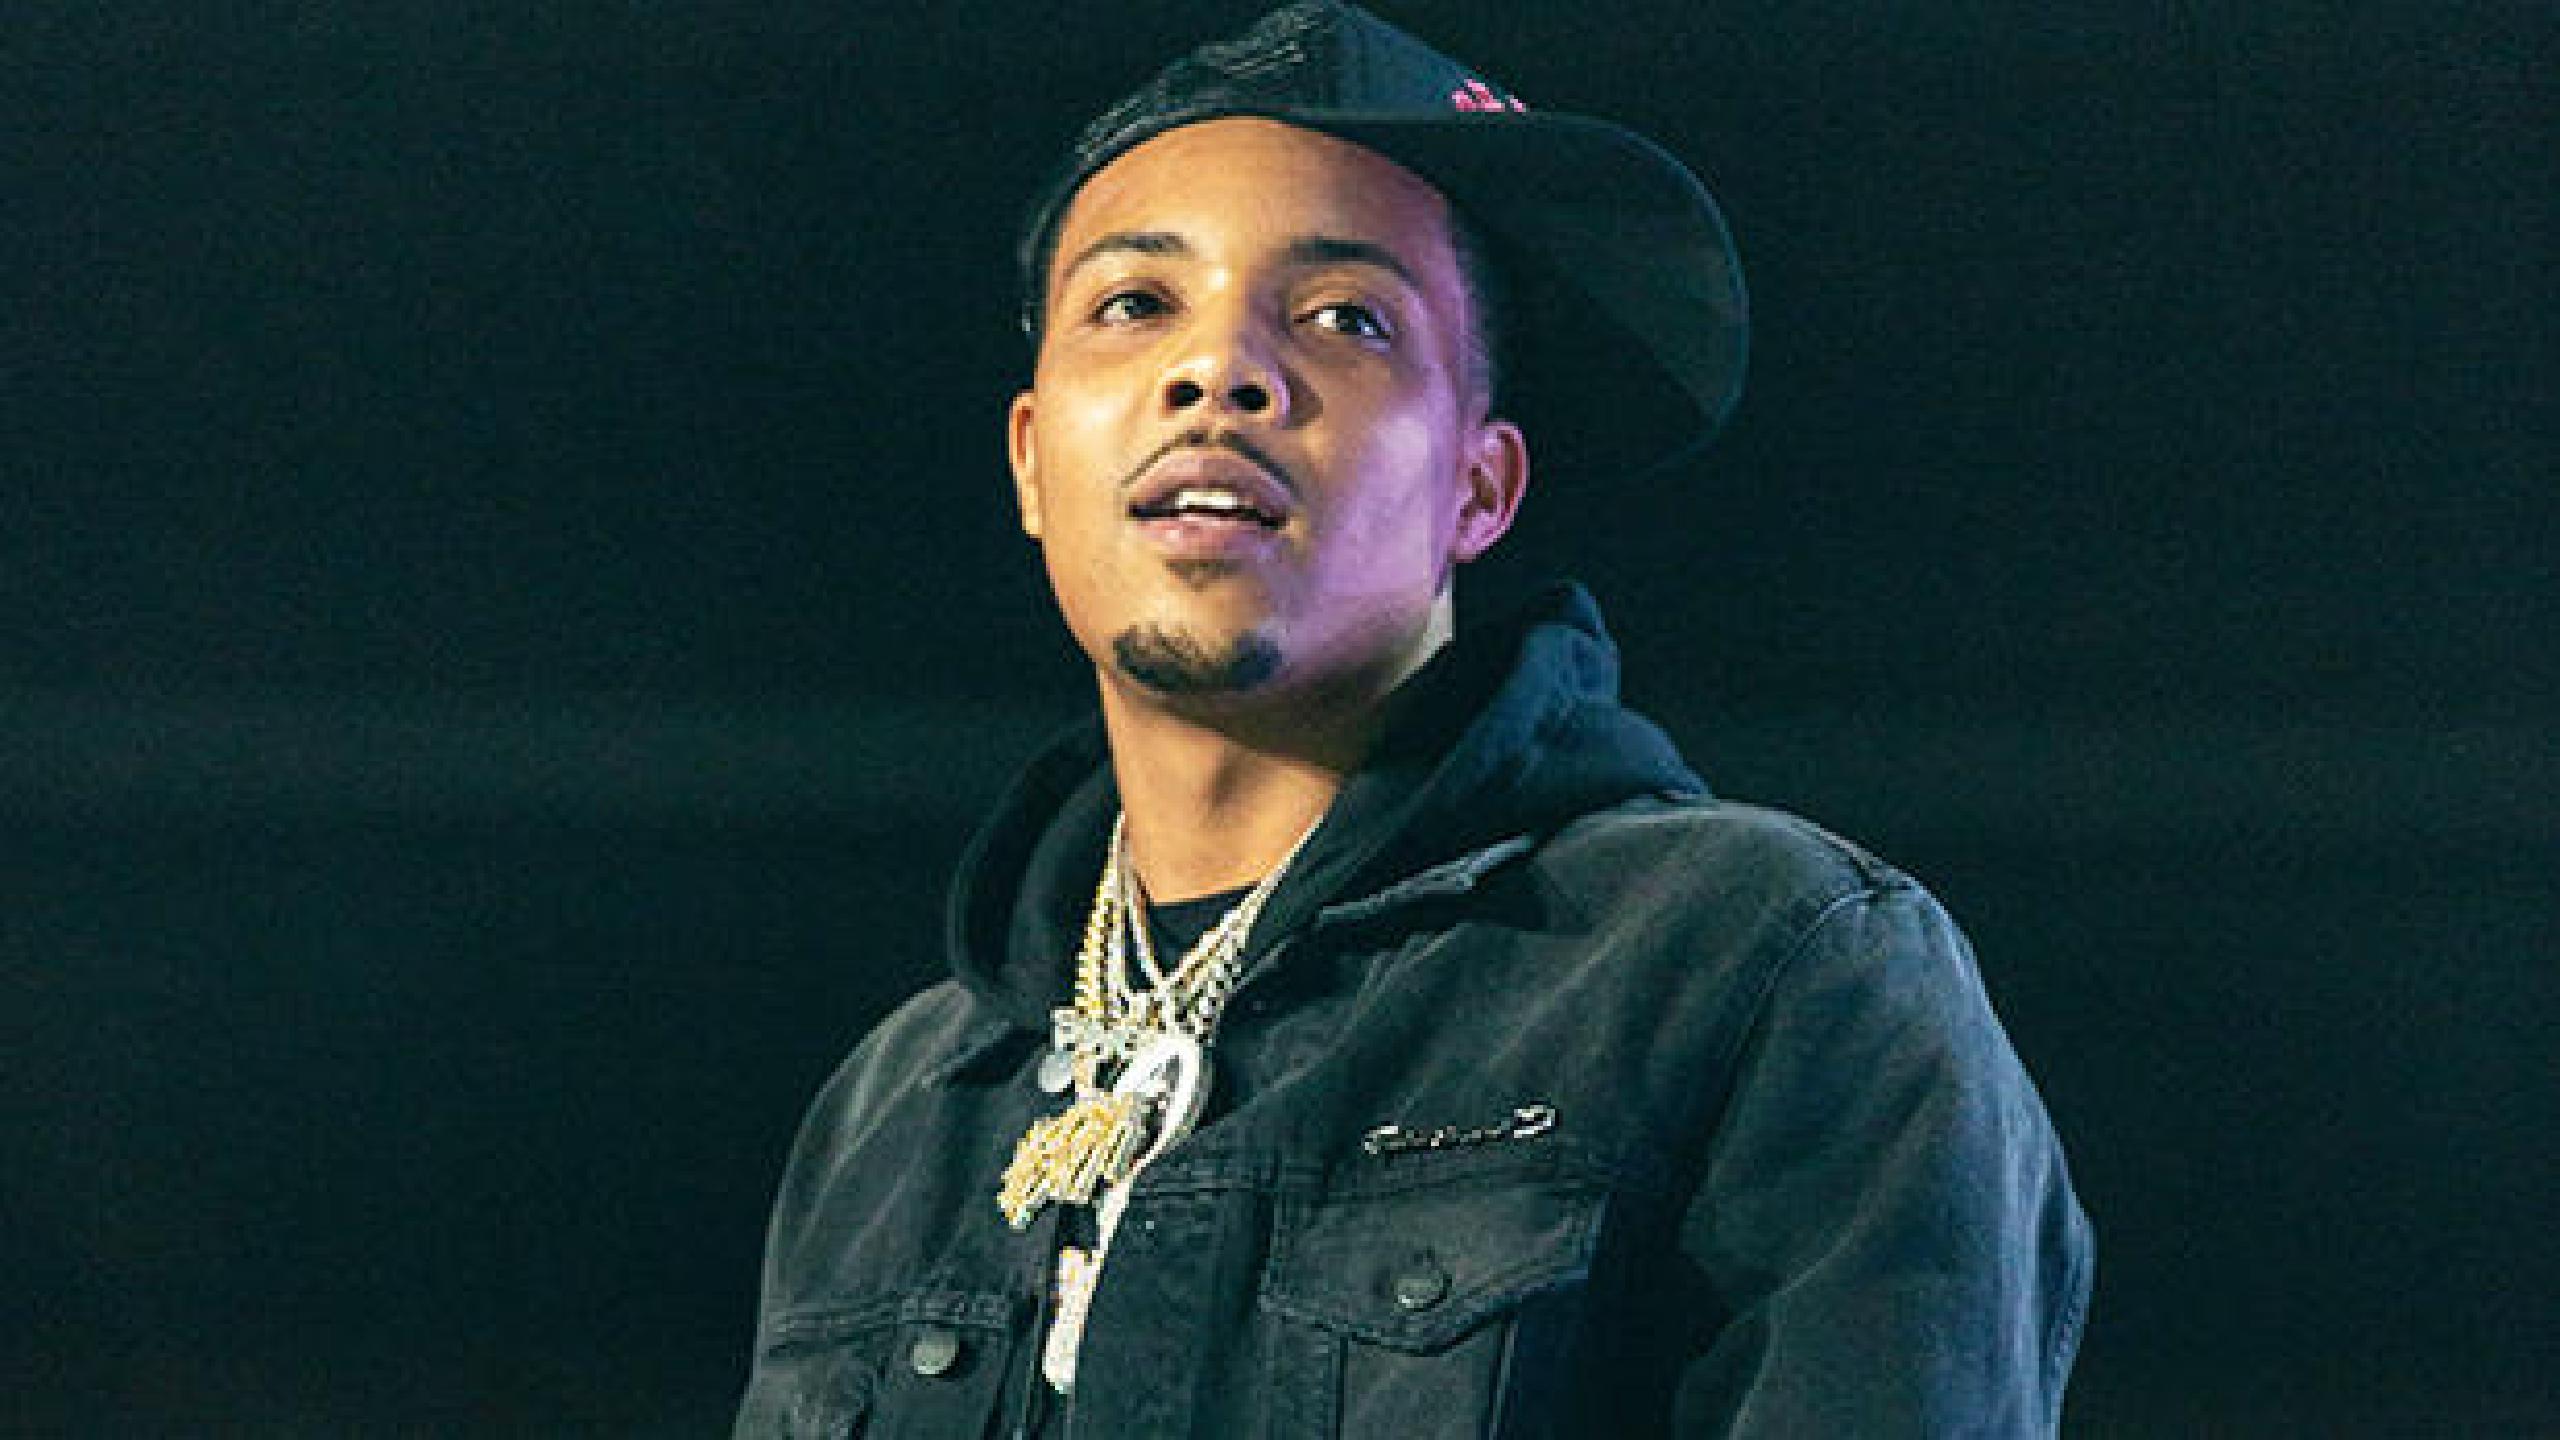 G Herbo tour dates 2021 2022. G Herbo tickets and concerts | Wegow Canada